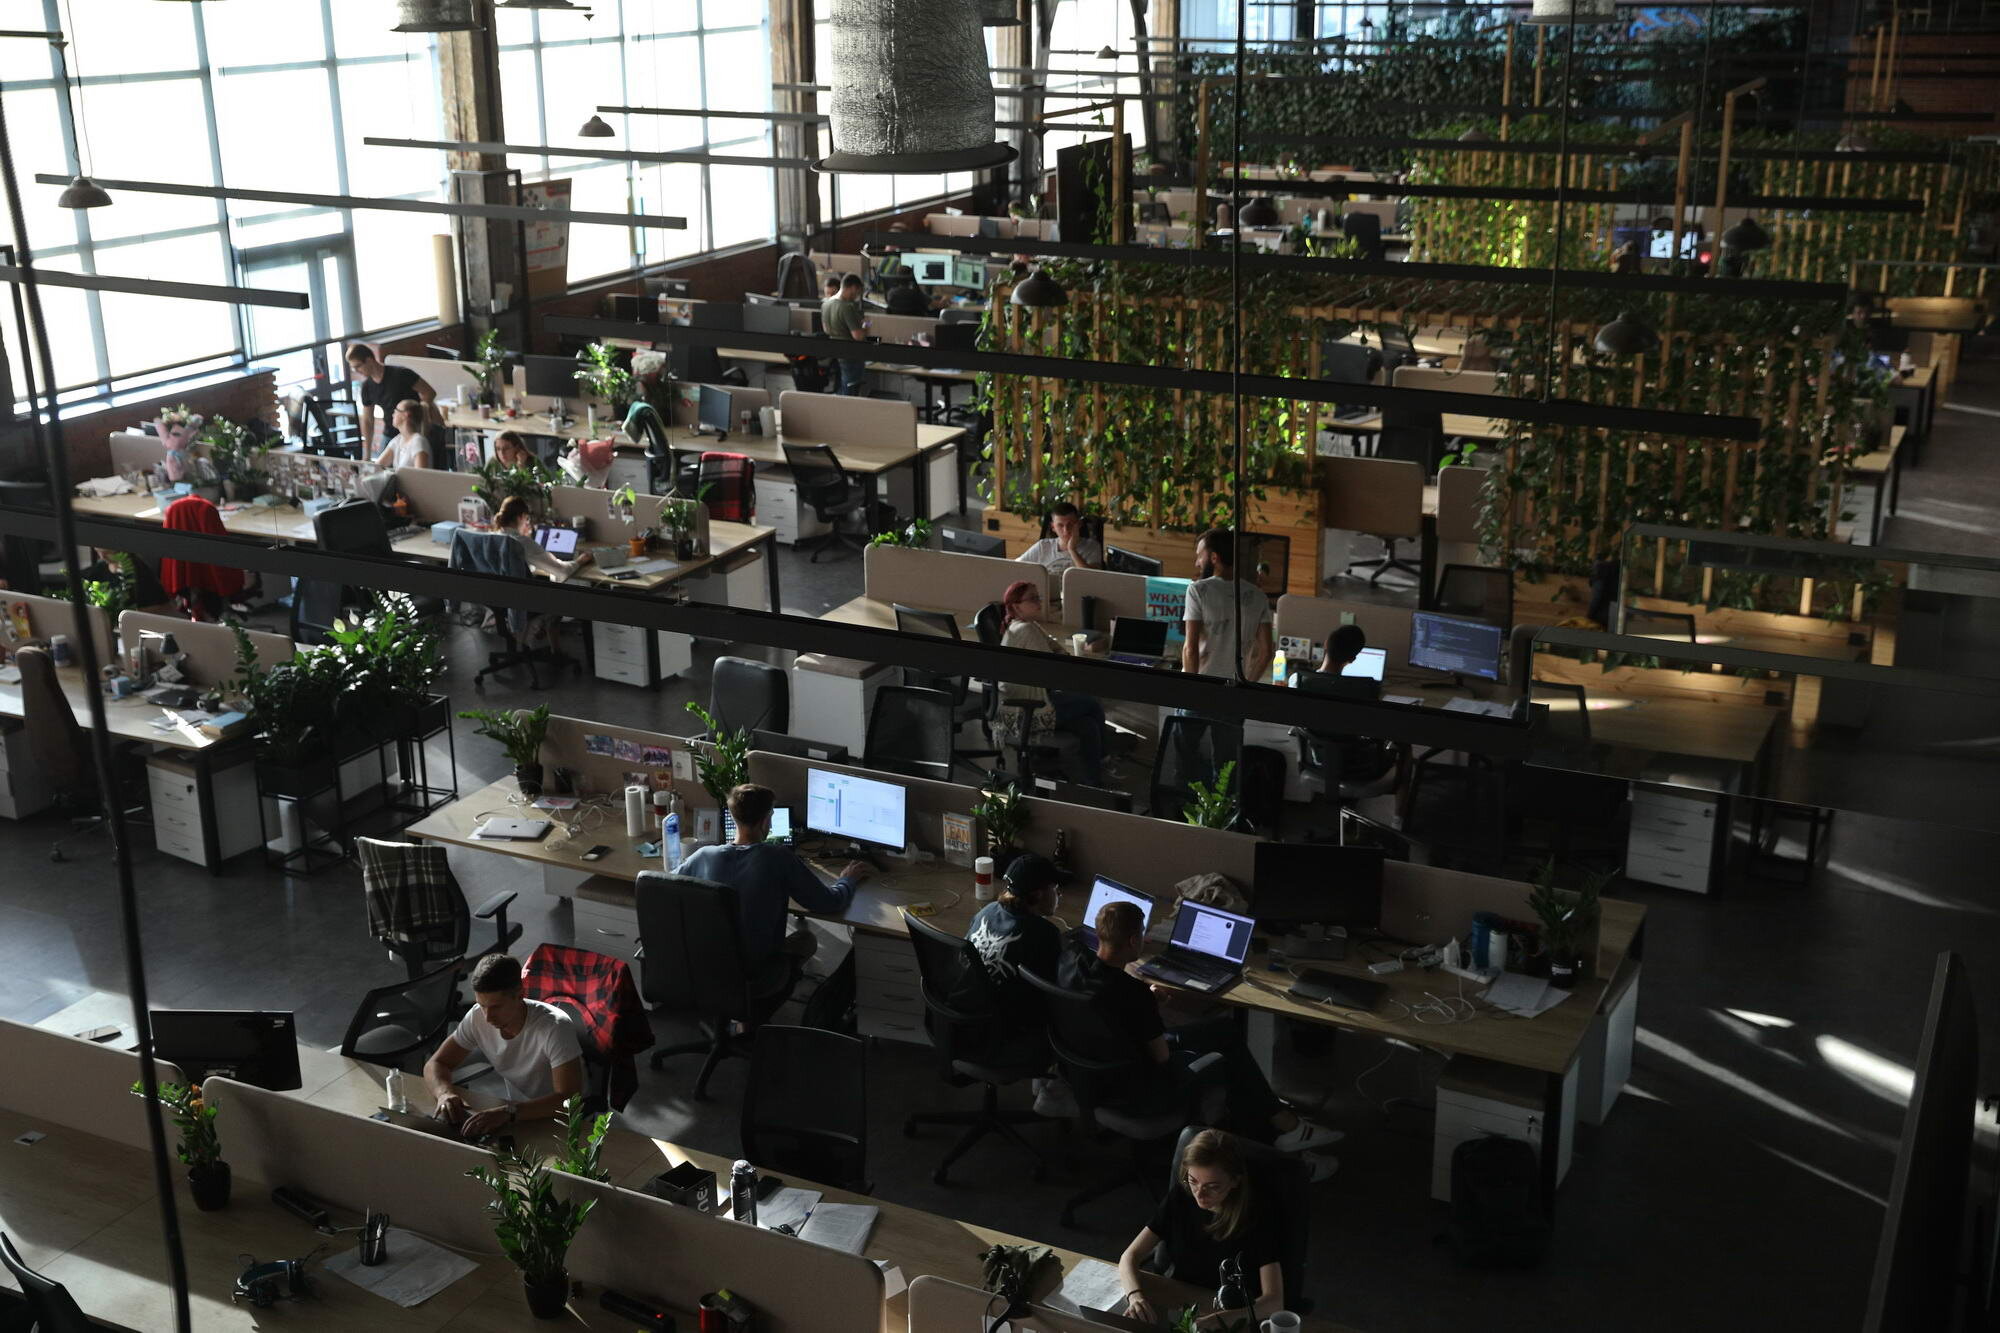 Employees of the job search website Jooble work in Jooble headquarters in Kyiv on Sept. 16, 2020. Jooble employs over 500 specialists and works in 71 countries. Although Jooble is a global company, it is registered in Ukraine and pays taxes in the country. 